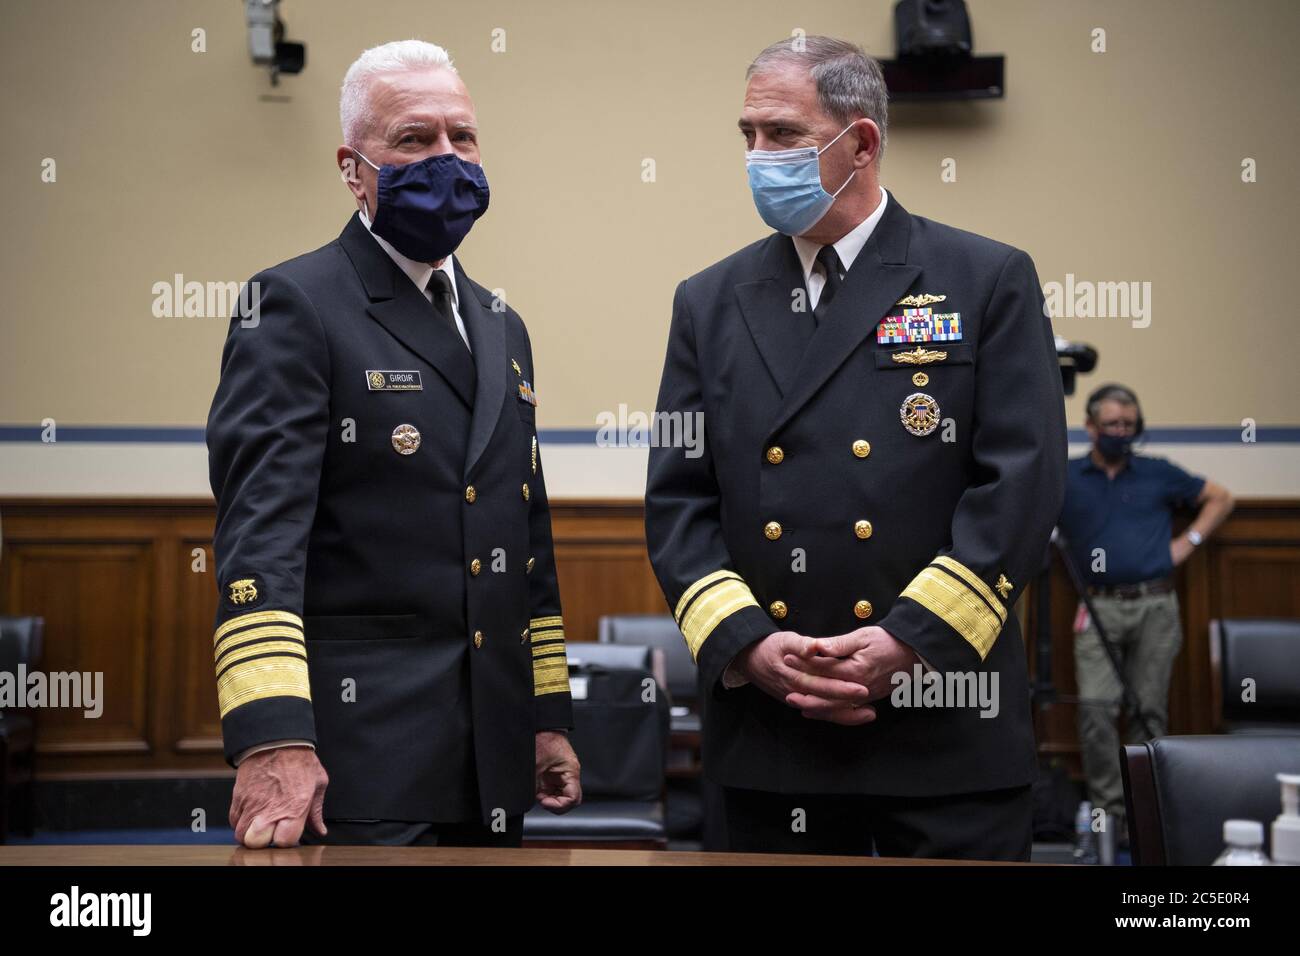 Washington, United States. 02nd July, 2020. Admiral Brett P. Giroir, M.D., Assistant Secretary for Health, left, talks with Rear Adm. John Polowczyk, leader of the Supply Chain Stabilization Task Force and vice director of logistics of the Joint Chiefs of Staff, before the start of a House Oversight and Reform Committee hearing on 'The Administration's Efforts to Procure, Stockpile, and Distribute Critical Supplies' in the Capitol in Washington, DC on Thursday, July 2, 2020. Pool Photo by Caroline Brehman/UPI Credit: UPI/Alamy Live News Stock Photo